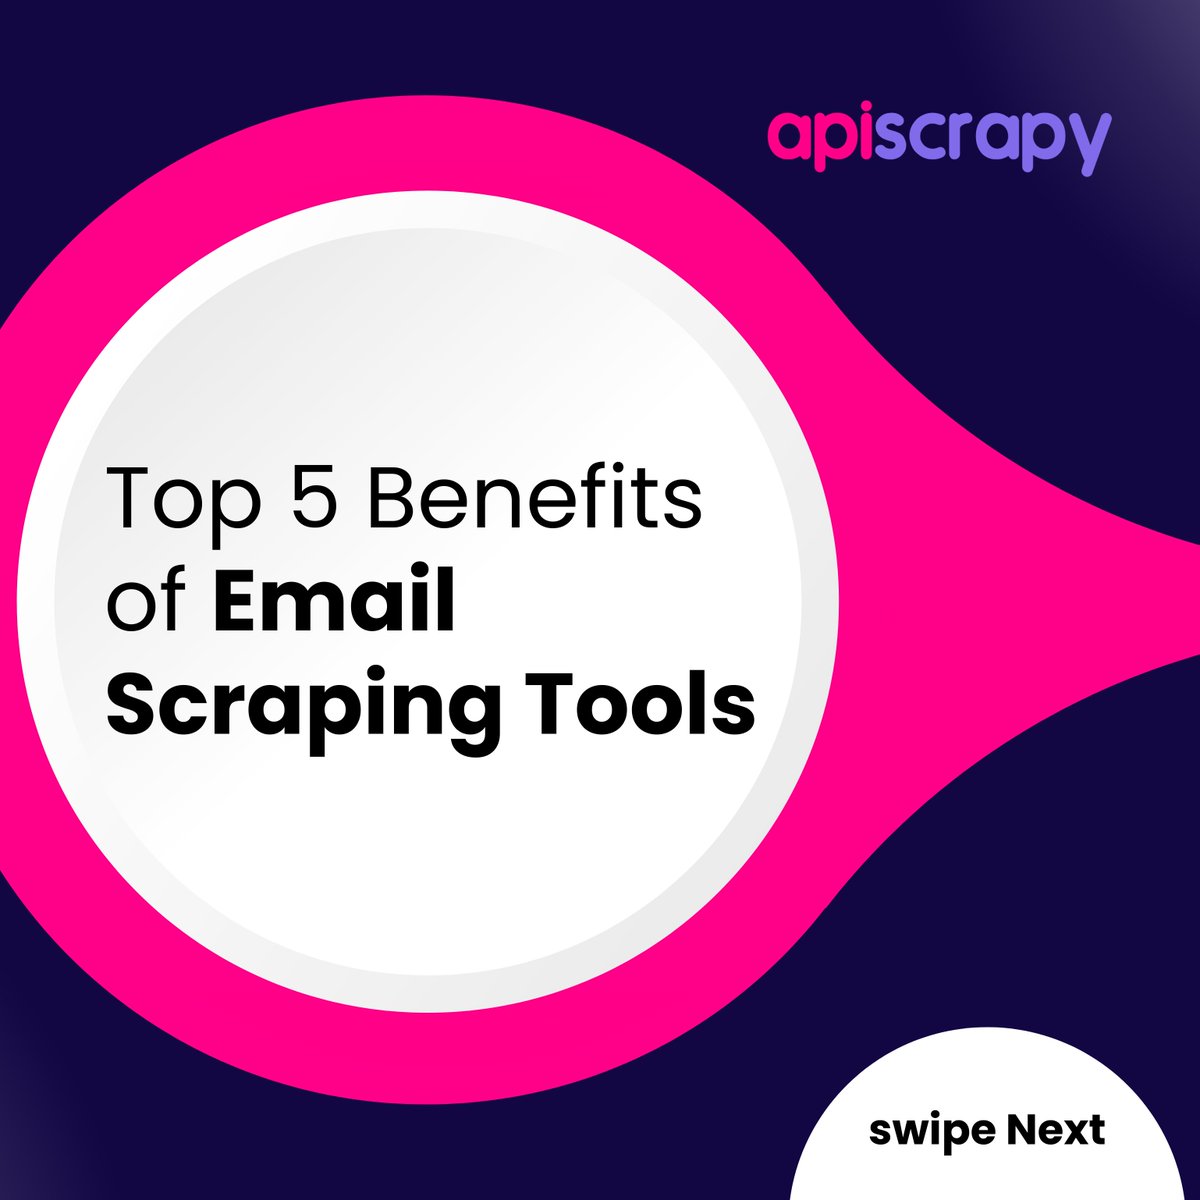 Top 5 Benefits of Email Scraping Tools.

Follow the link in the comments for more details.

#api #apidevelopment #emailmarketing #emailmarketingstrategy #emaillist #emailcampaigns #emailautomation #emailmarketingsoftware #emailscraping #emailscrapingtool